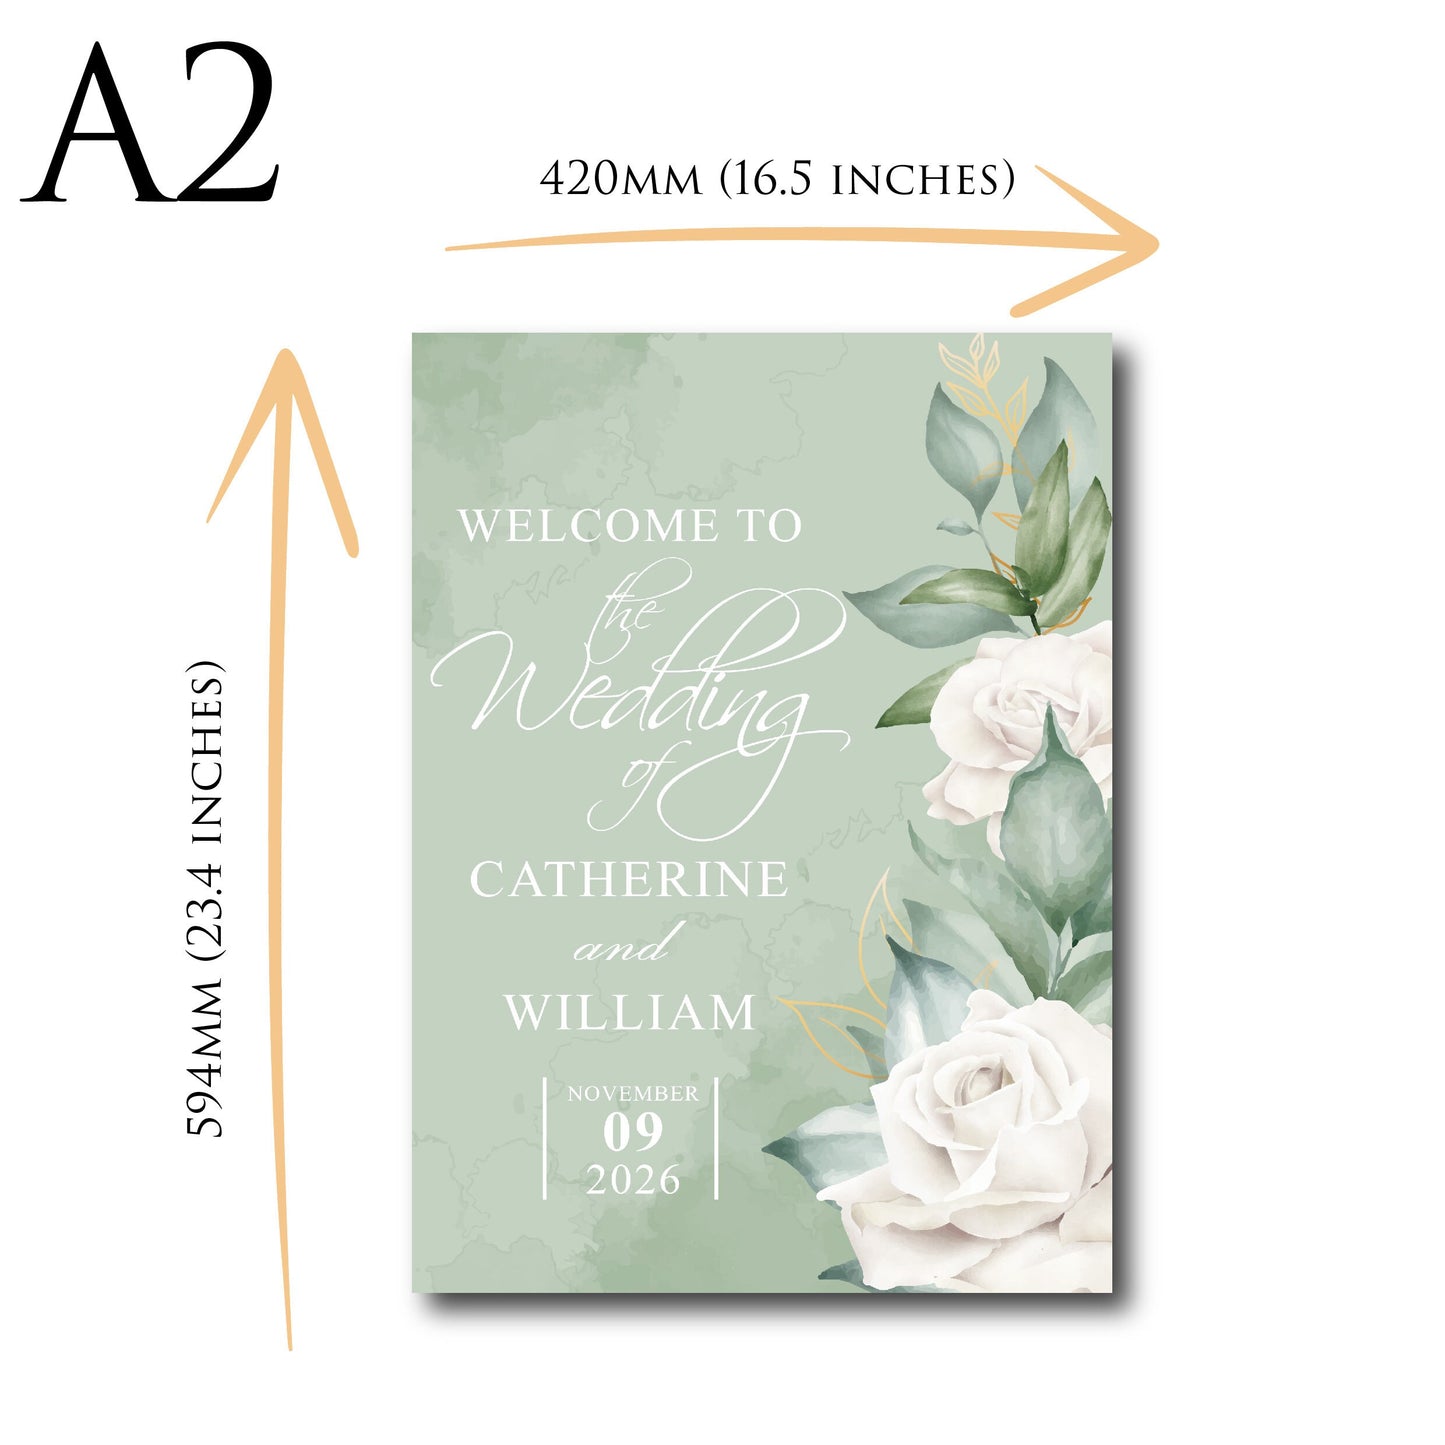 Personalised Wedding Welcome Sign TLPCW003 Physical or Digital, A1 or A2 Portrait Welcome Board for Wedding Easel, Welcome for Wedding,